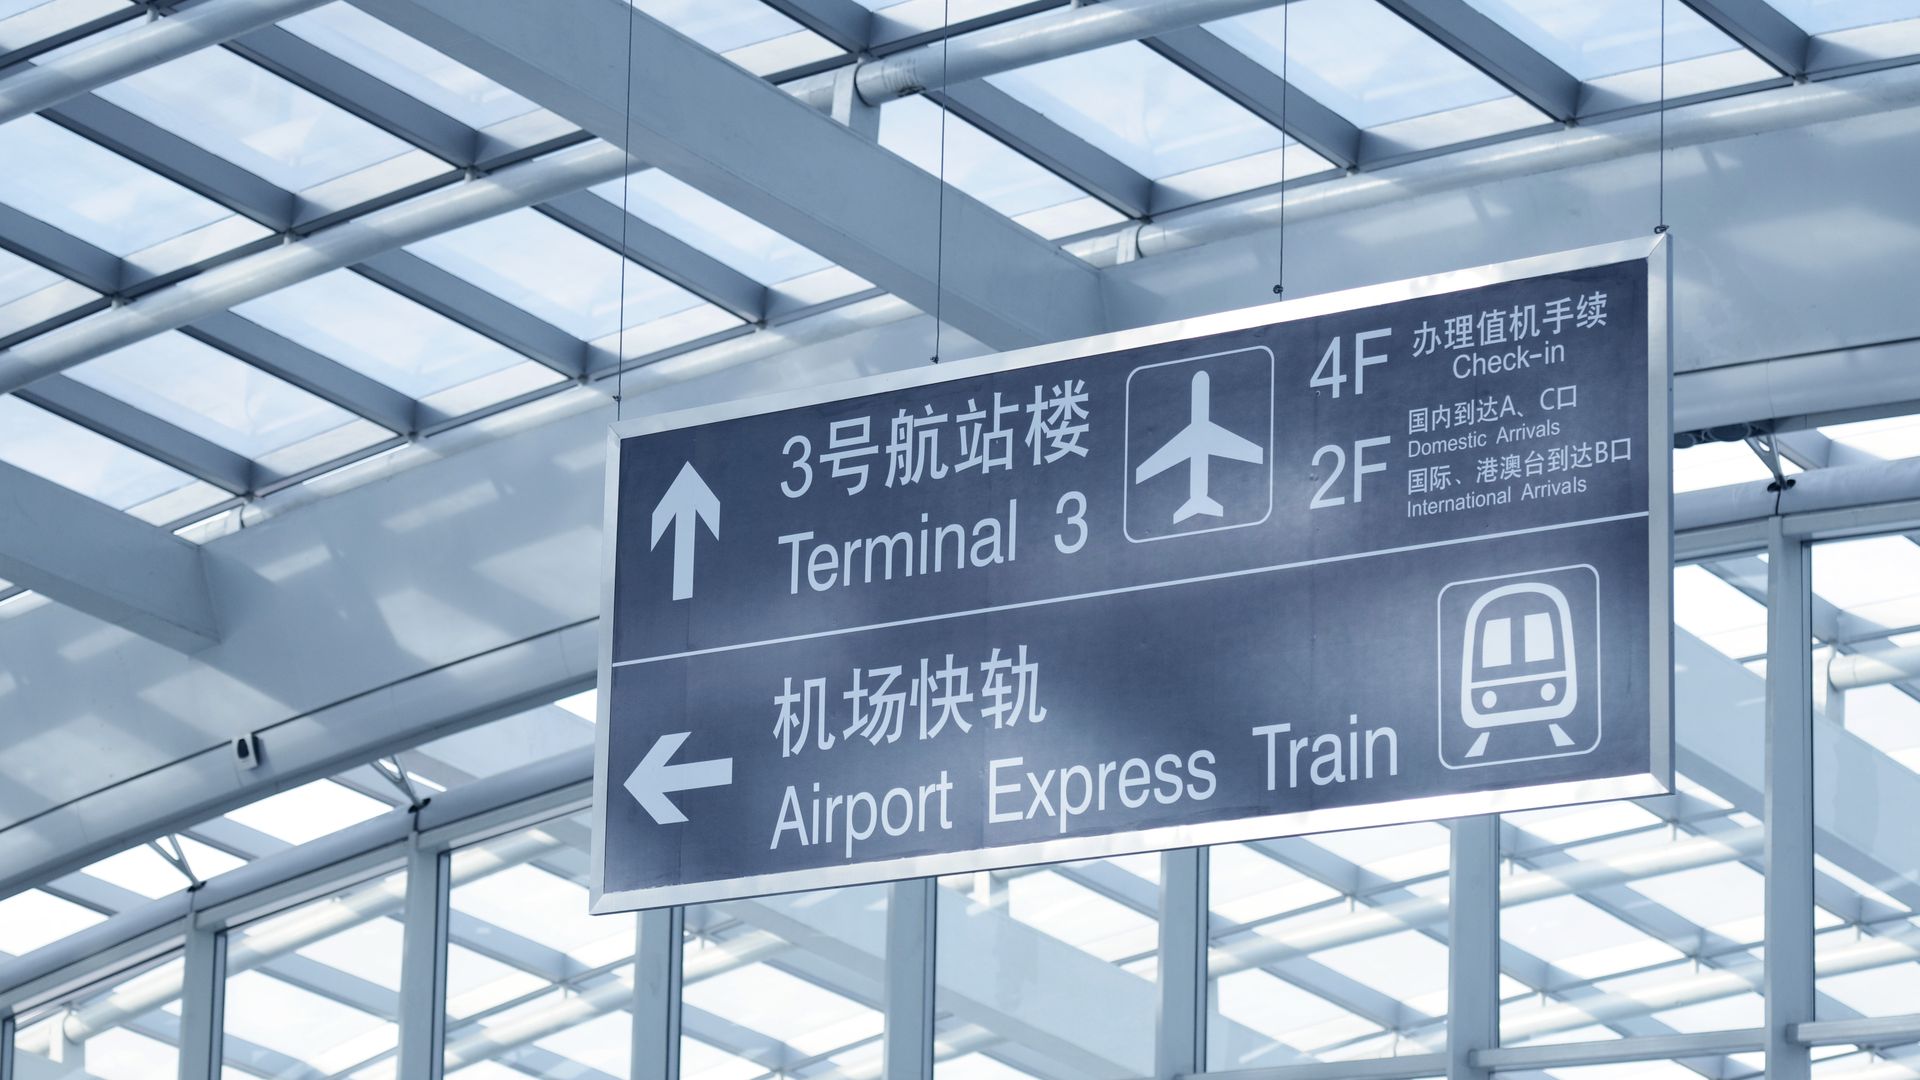 A directional sign of Beijing Airport Terminal 3